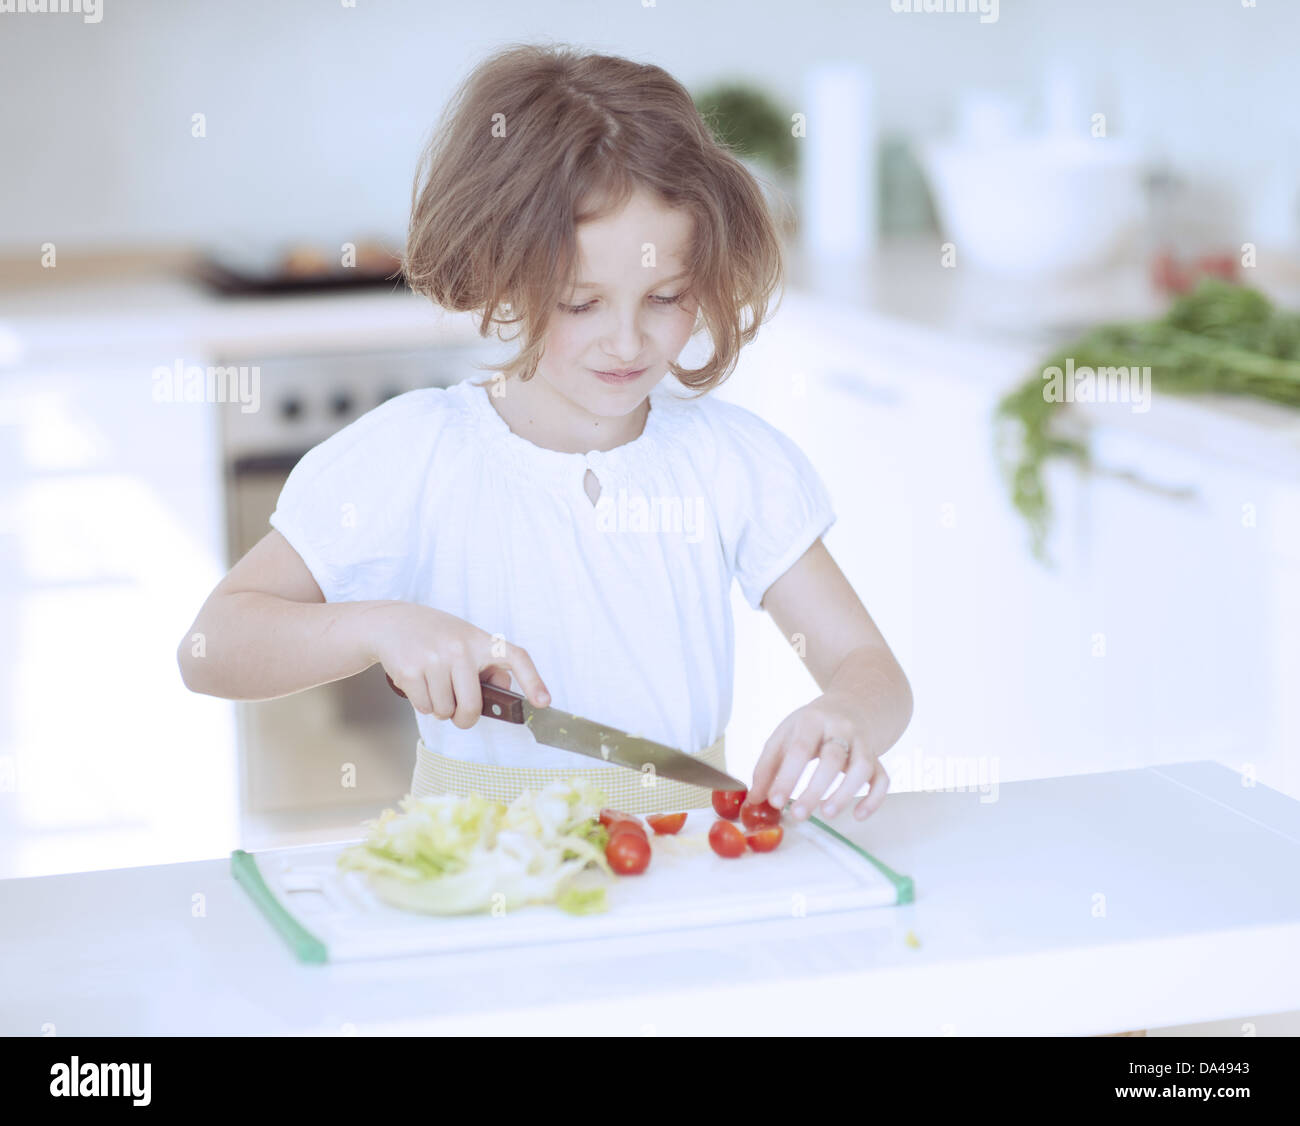 Young girl chopping tomatoes and making a salad in the kitchen Stock Photo